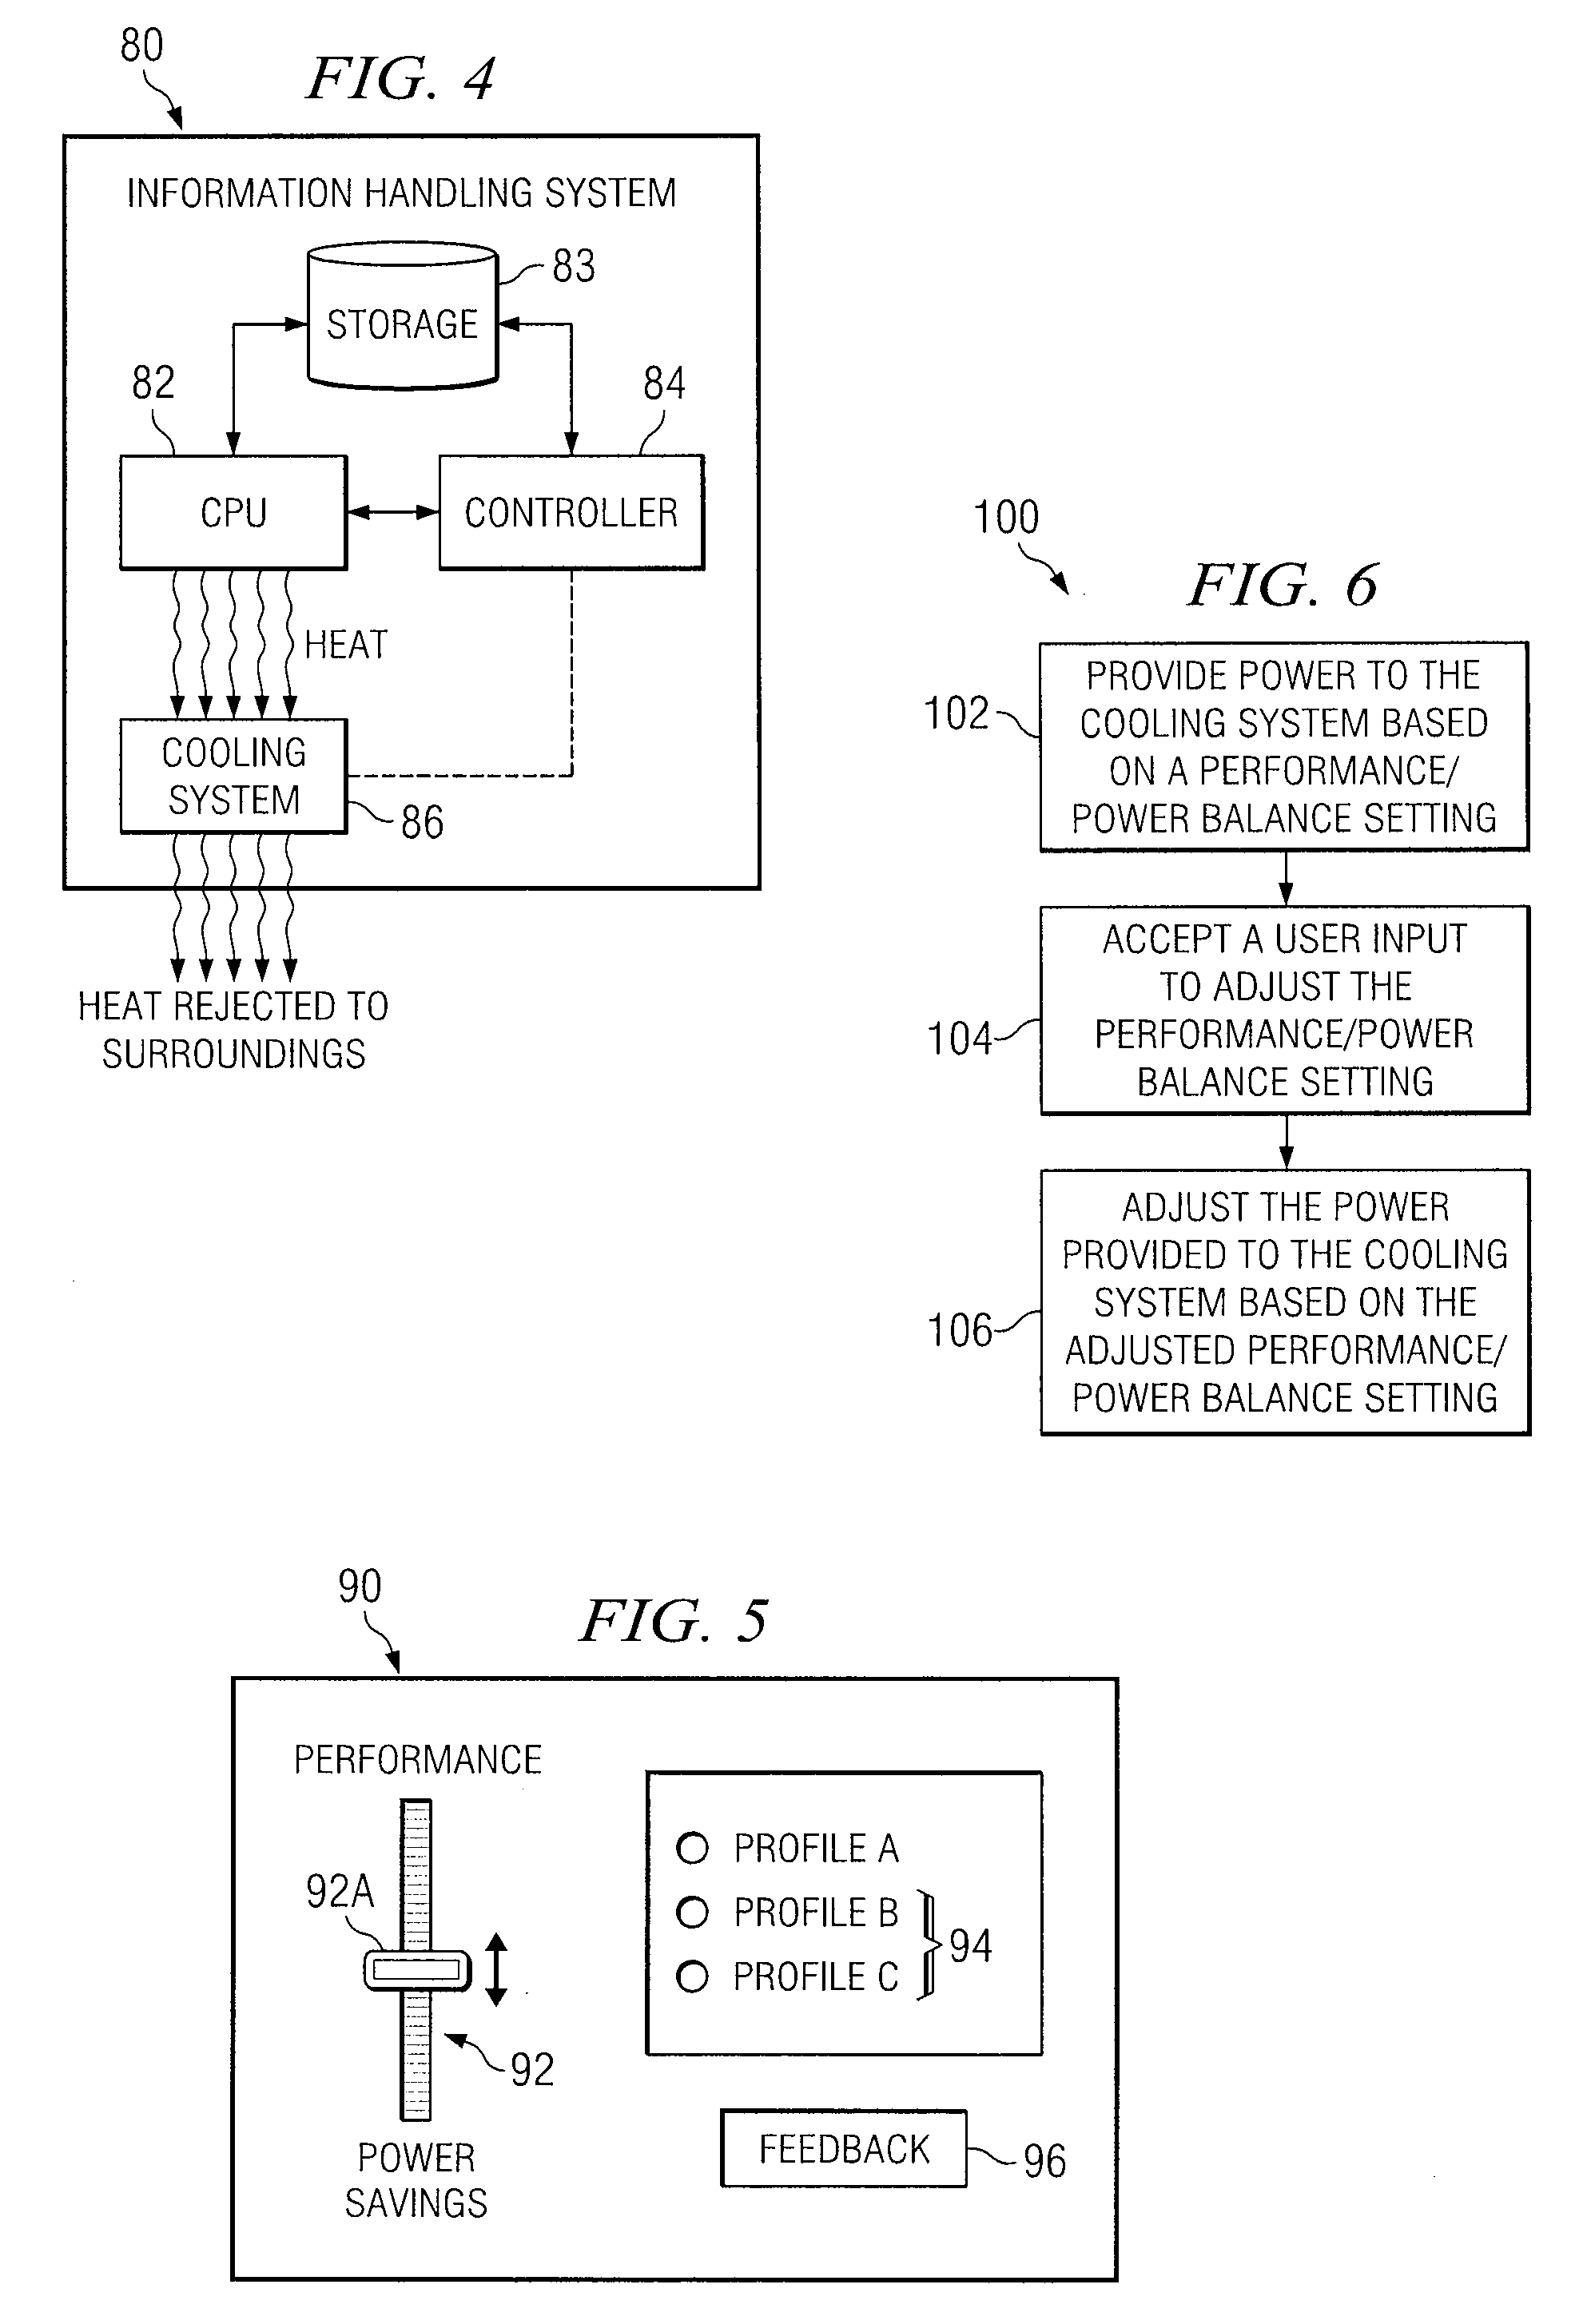 Method and System for Managing the Power Consumption of an Information Handling System